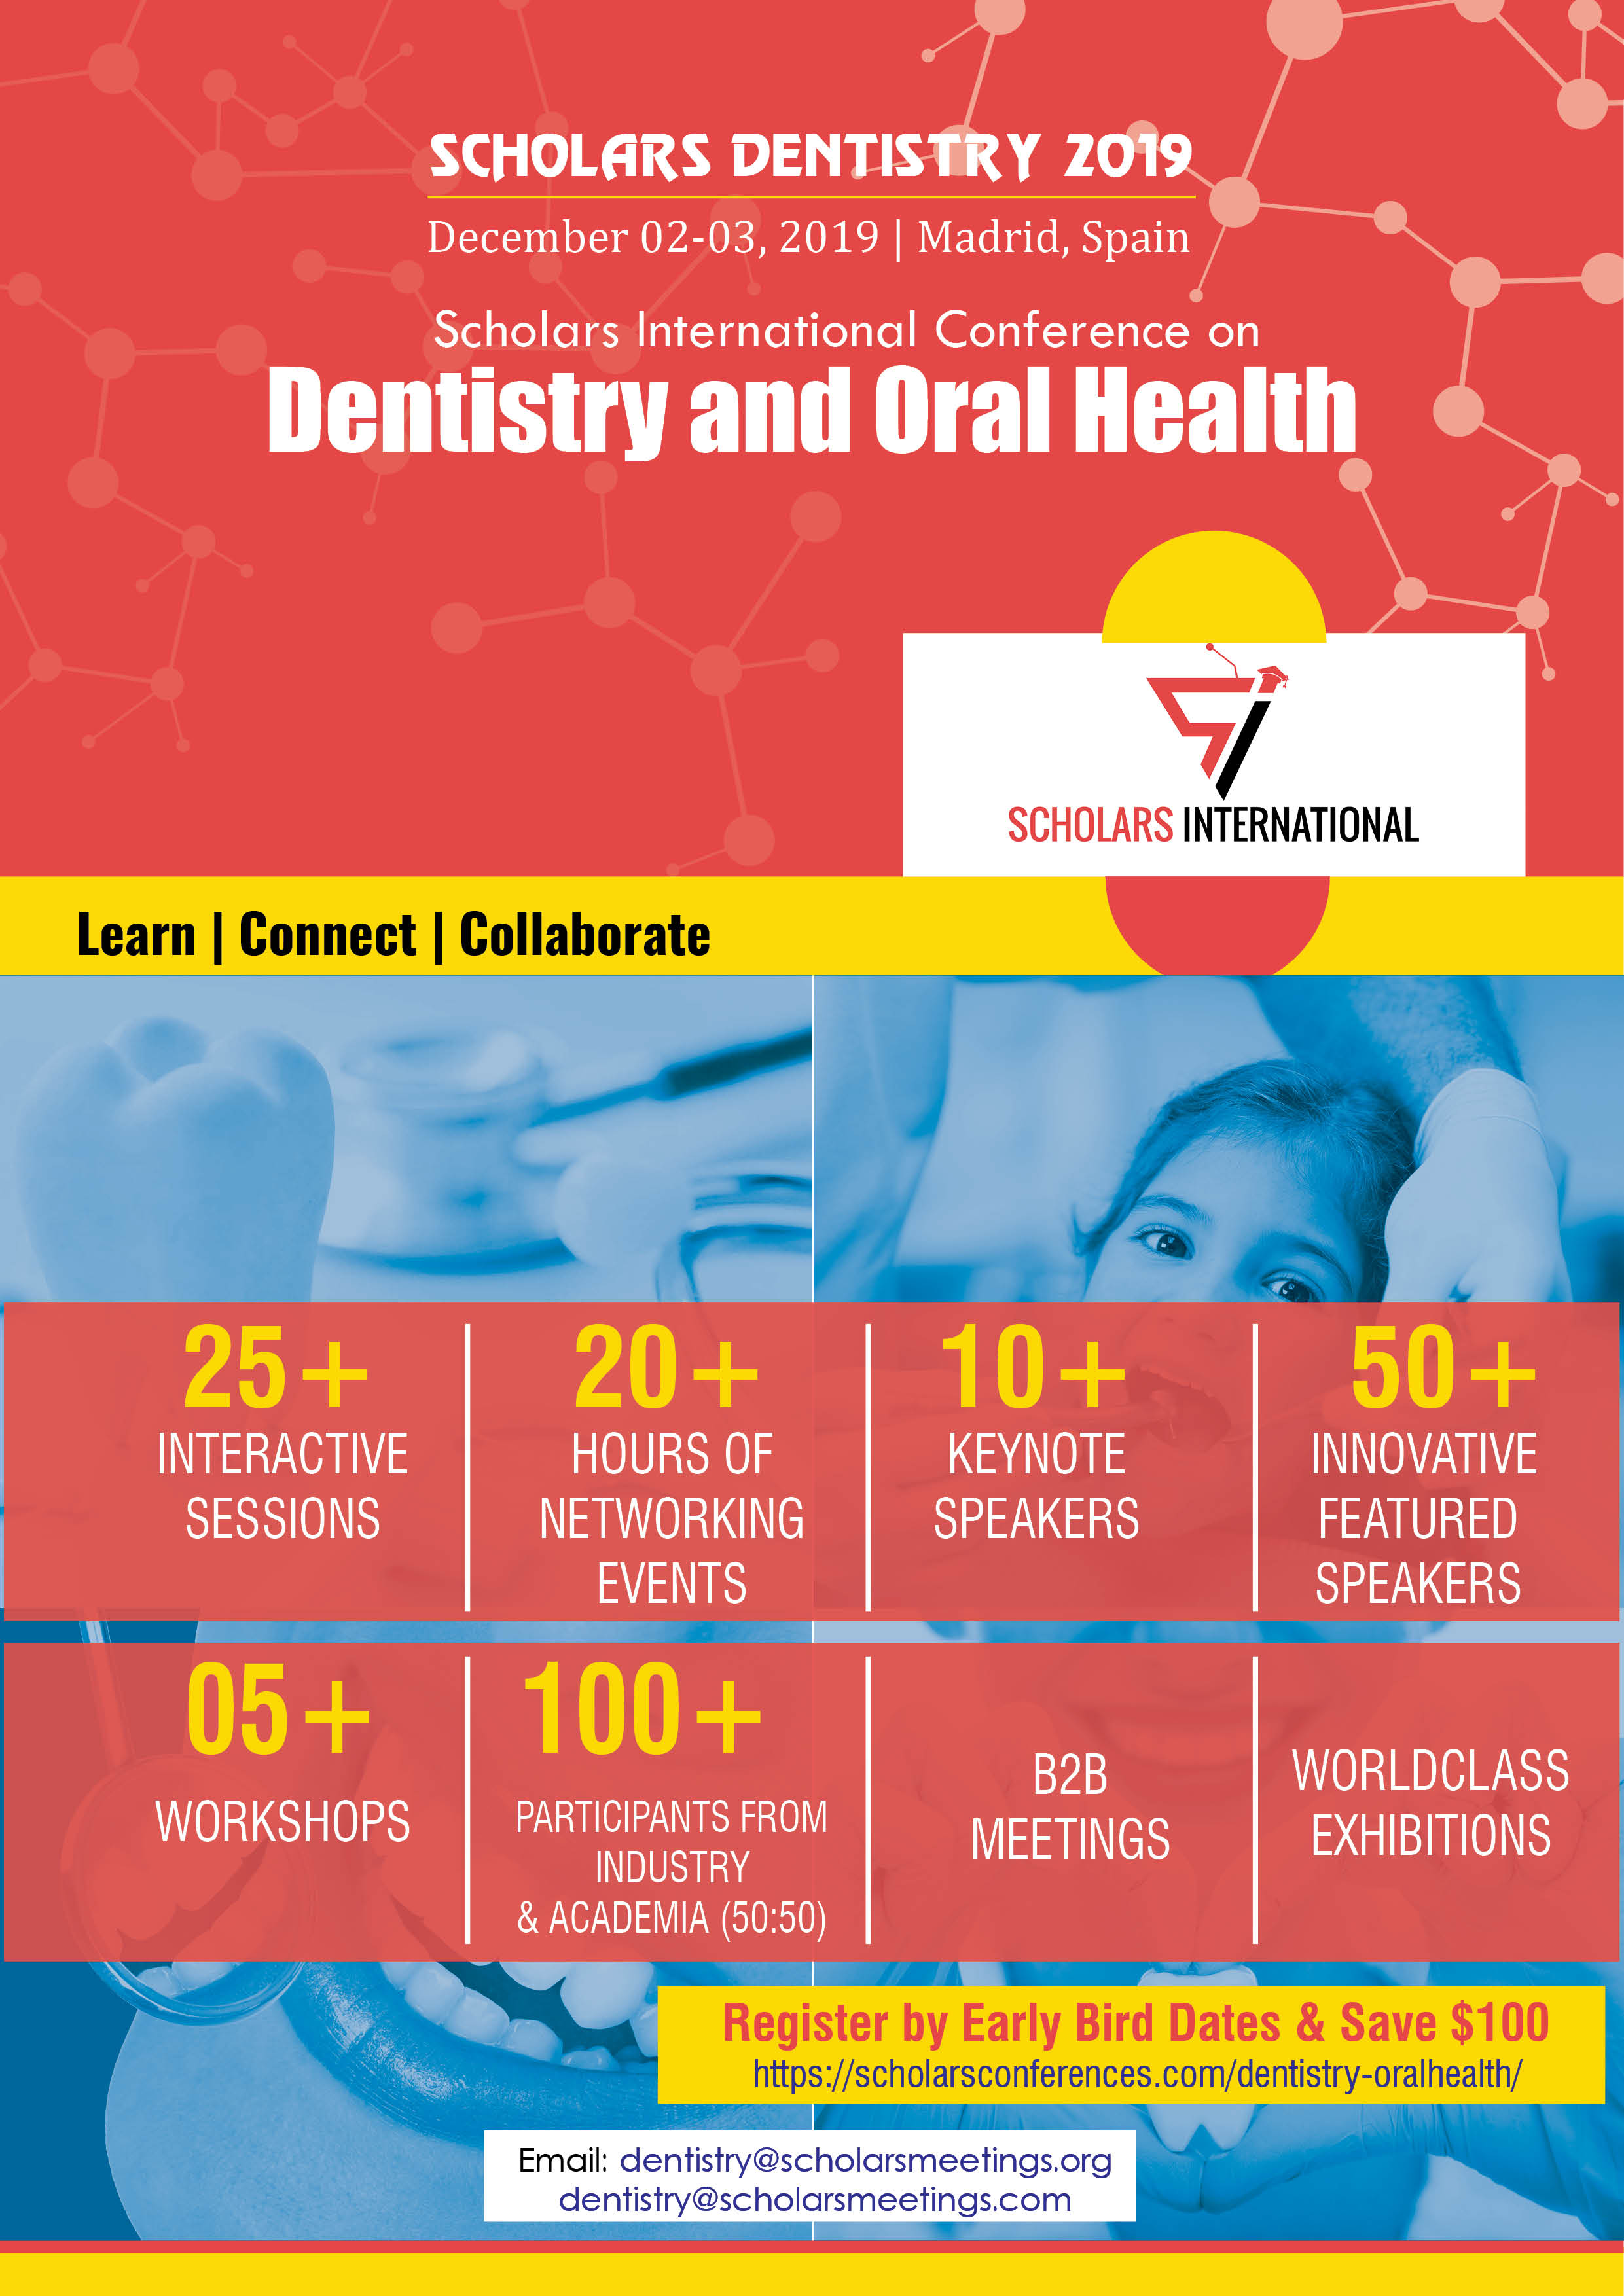 Scholars International Conference on Dentistry and Oral Health, Madrid, Spain